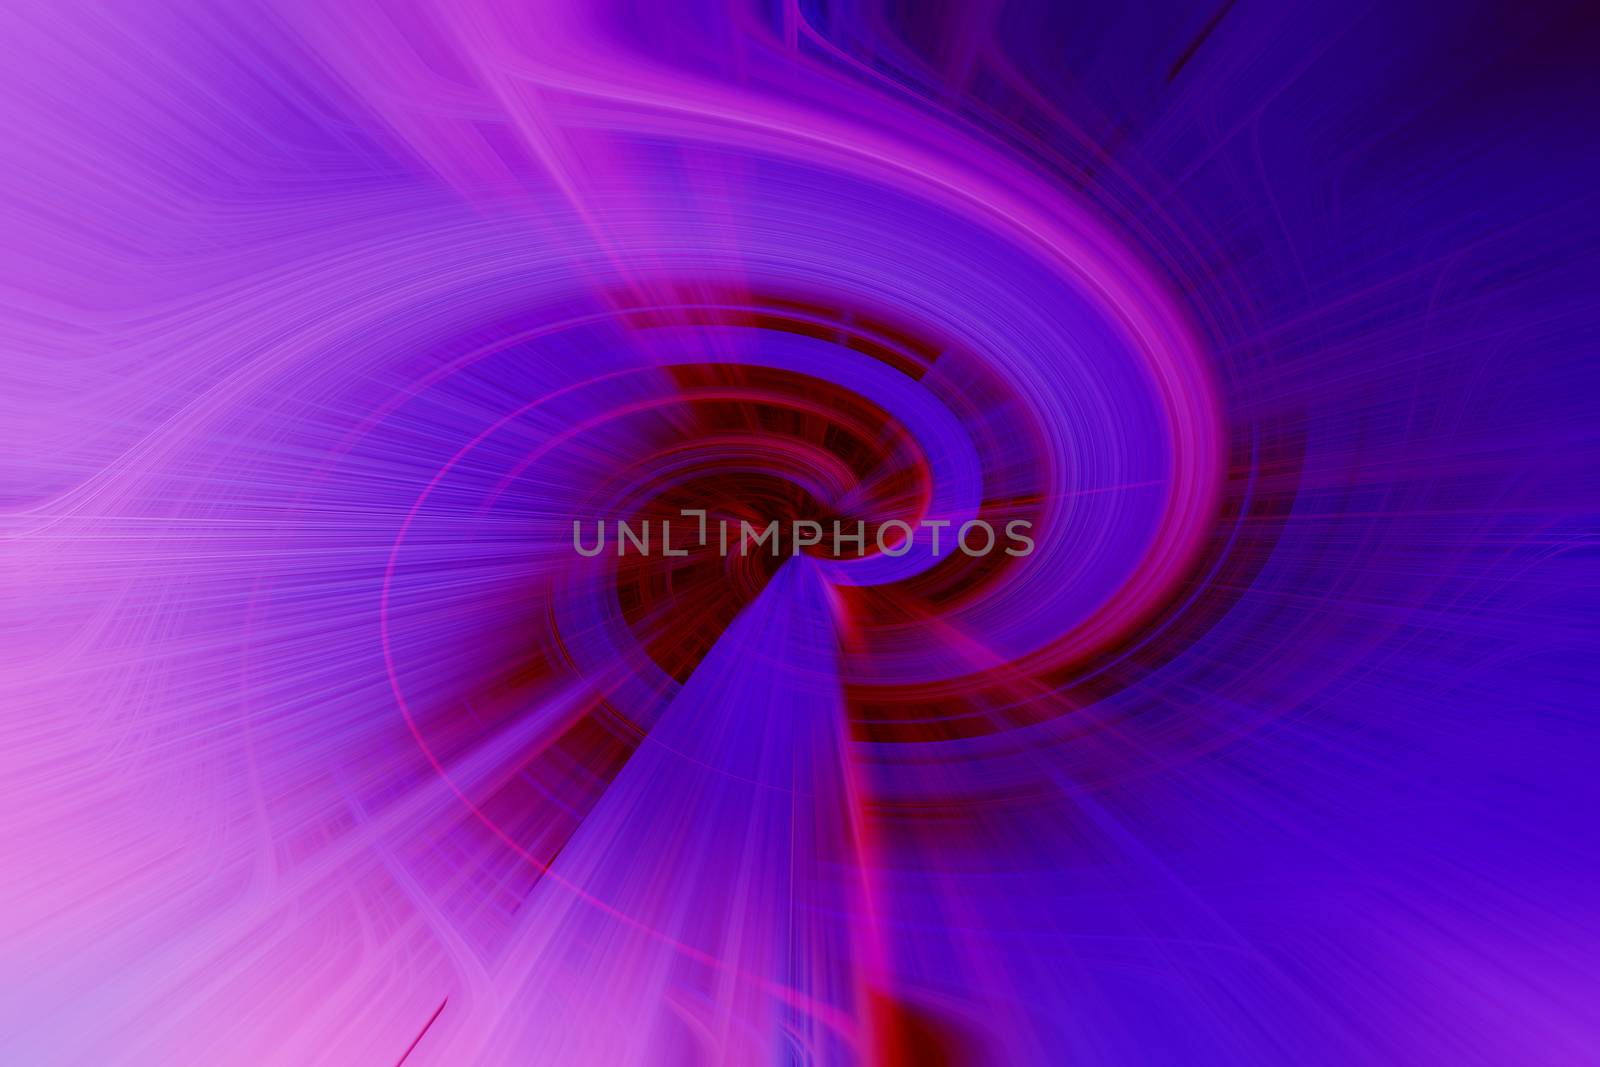 Beautiful abstract intertwined 3d fibers and light trails forming a shape of vortex, sparkle, flame, flower, interlinked hearts. Blue, maroon, pink, and purple colors. Illustration by DamantisZ